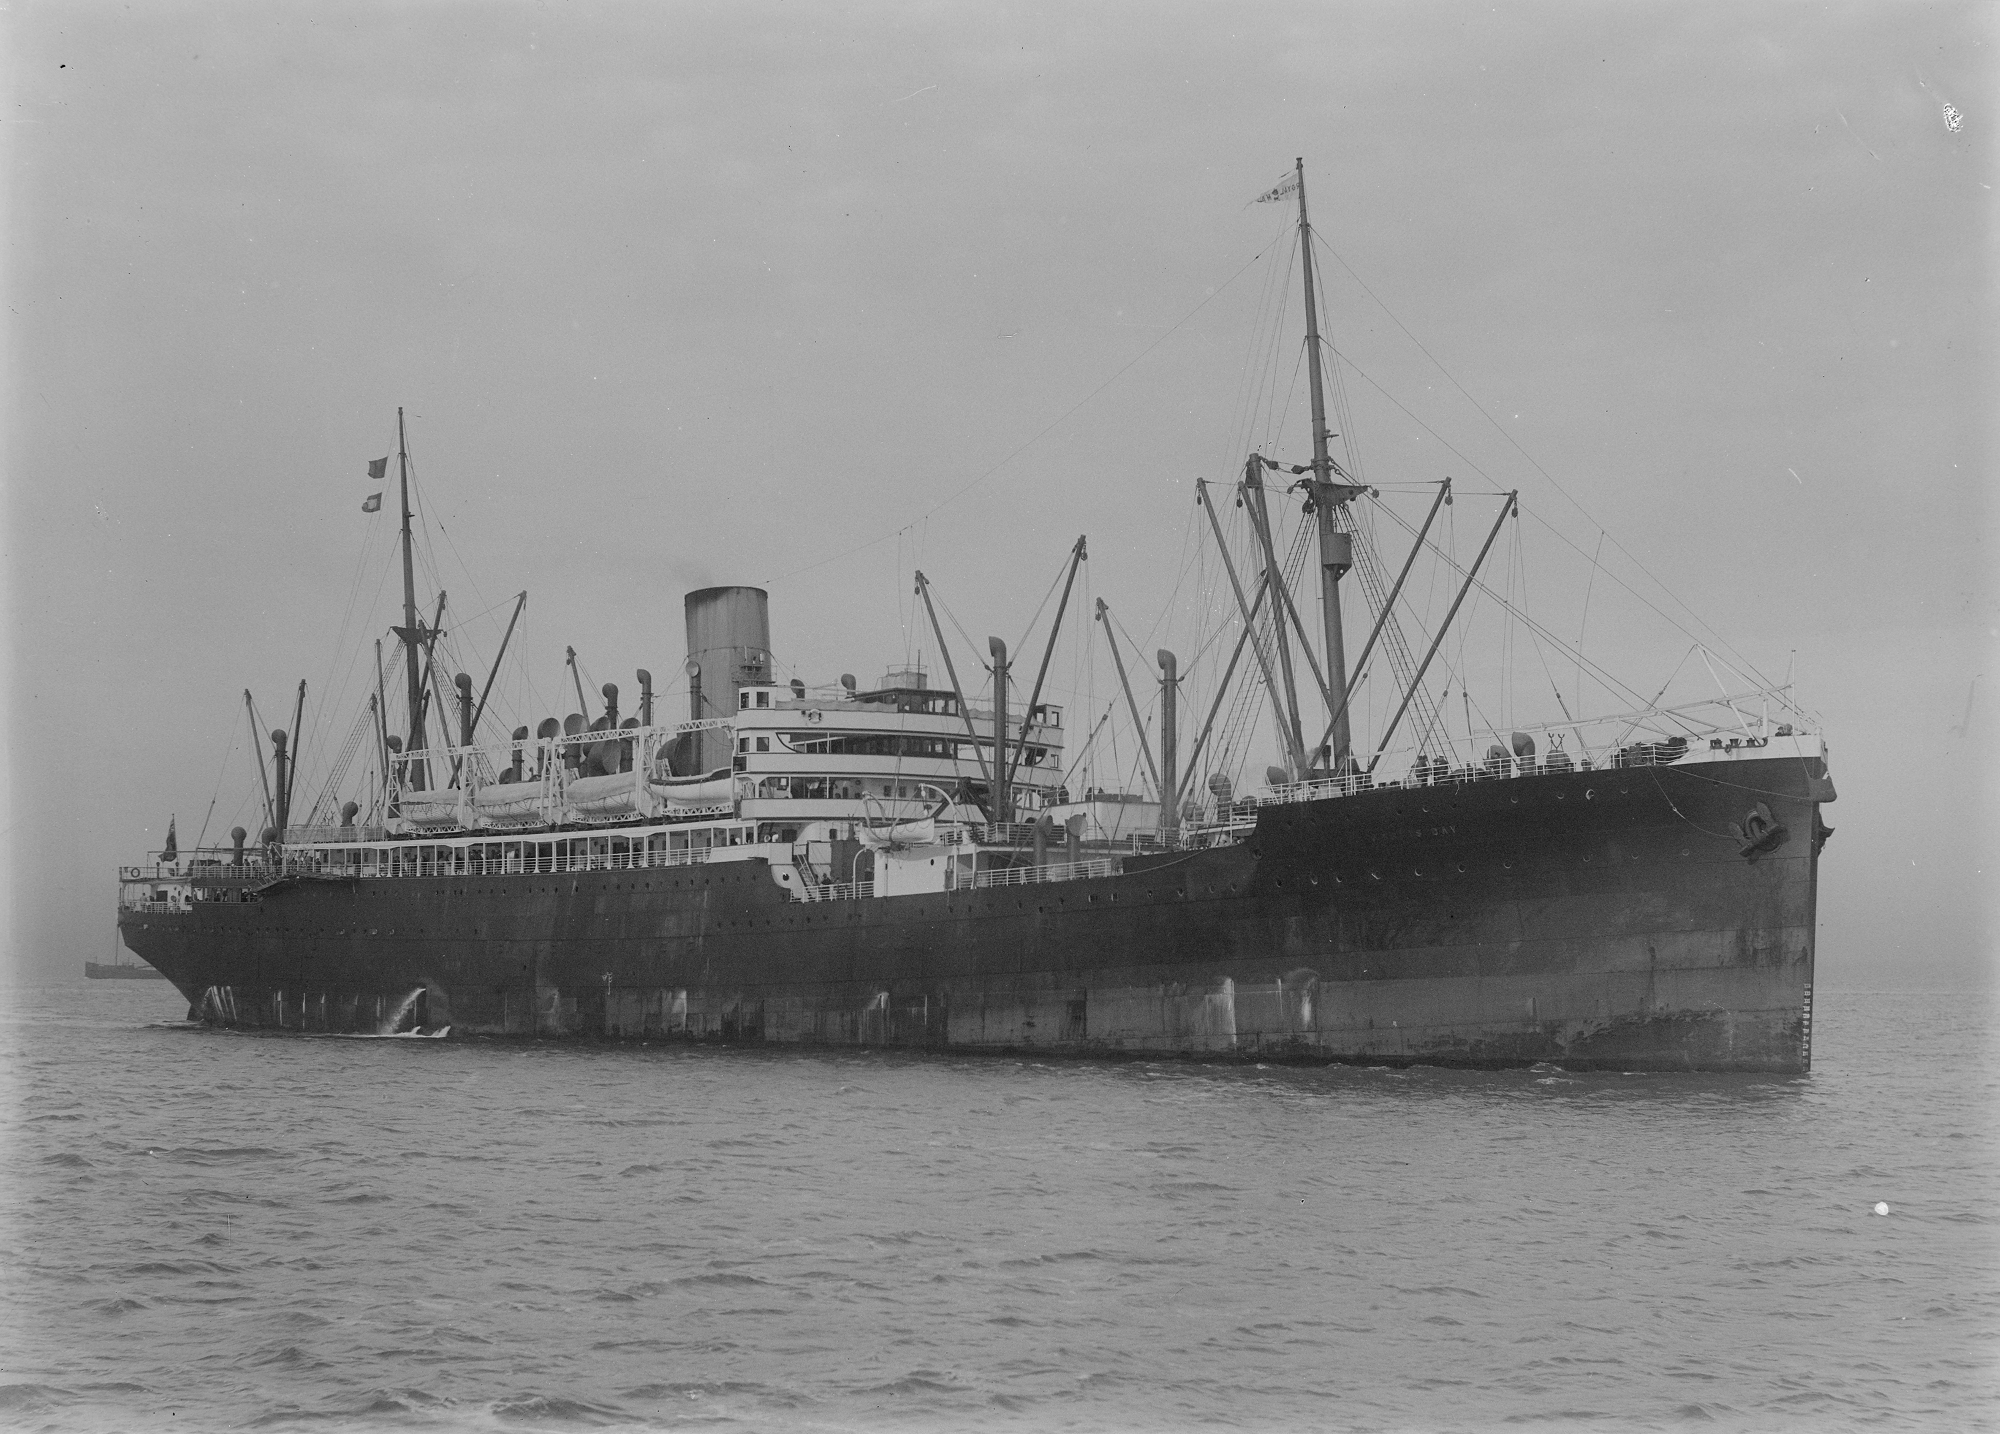 Commonwealth Government Line, T.S.S. Jervis Bay passenger ship 1900